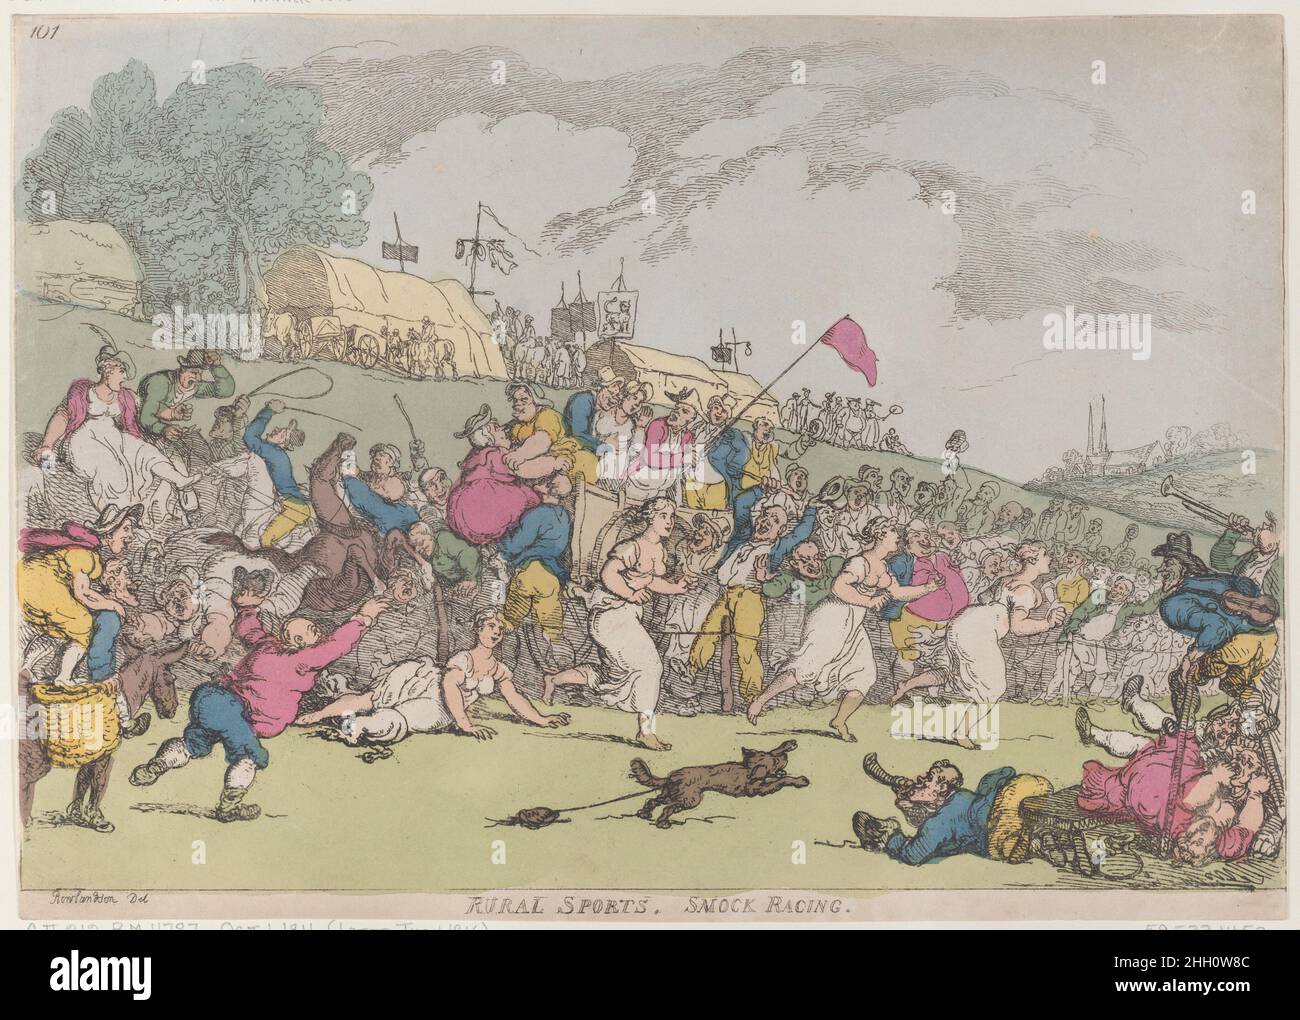 Rural Sports, Smock Racing [October 1, 1811], reprint Thomas Rowlandson A crowd watches three country girls who race barefoot and scantily clad. A fourth girl has been tripped by a dog at left.. Rural Sports, Smock Racing. Thomas Rowlandson (British, London 1757–1827 London). [October 1, 1811], reprint. Hand-colored etching. Thomas Tegg (British, 1776–1846). Prints Stock Photo